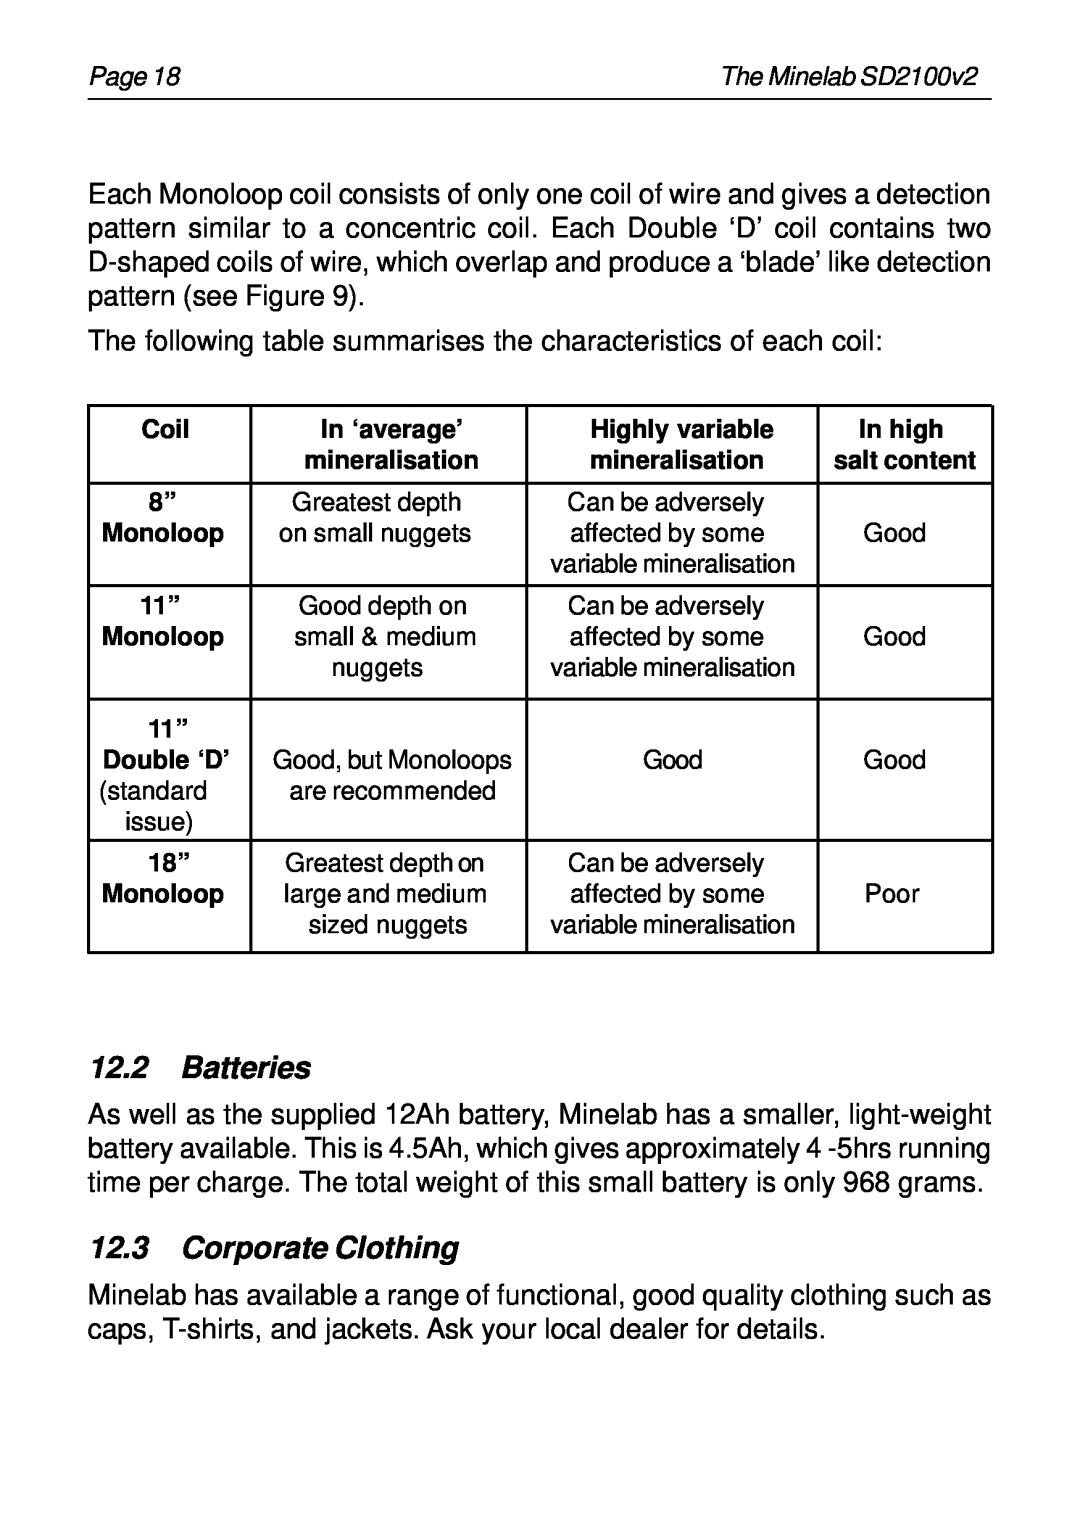 Minelab SD2100v2 instruction manual Batteries, Corporate Clothing 